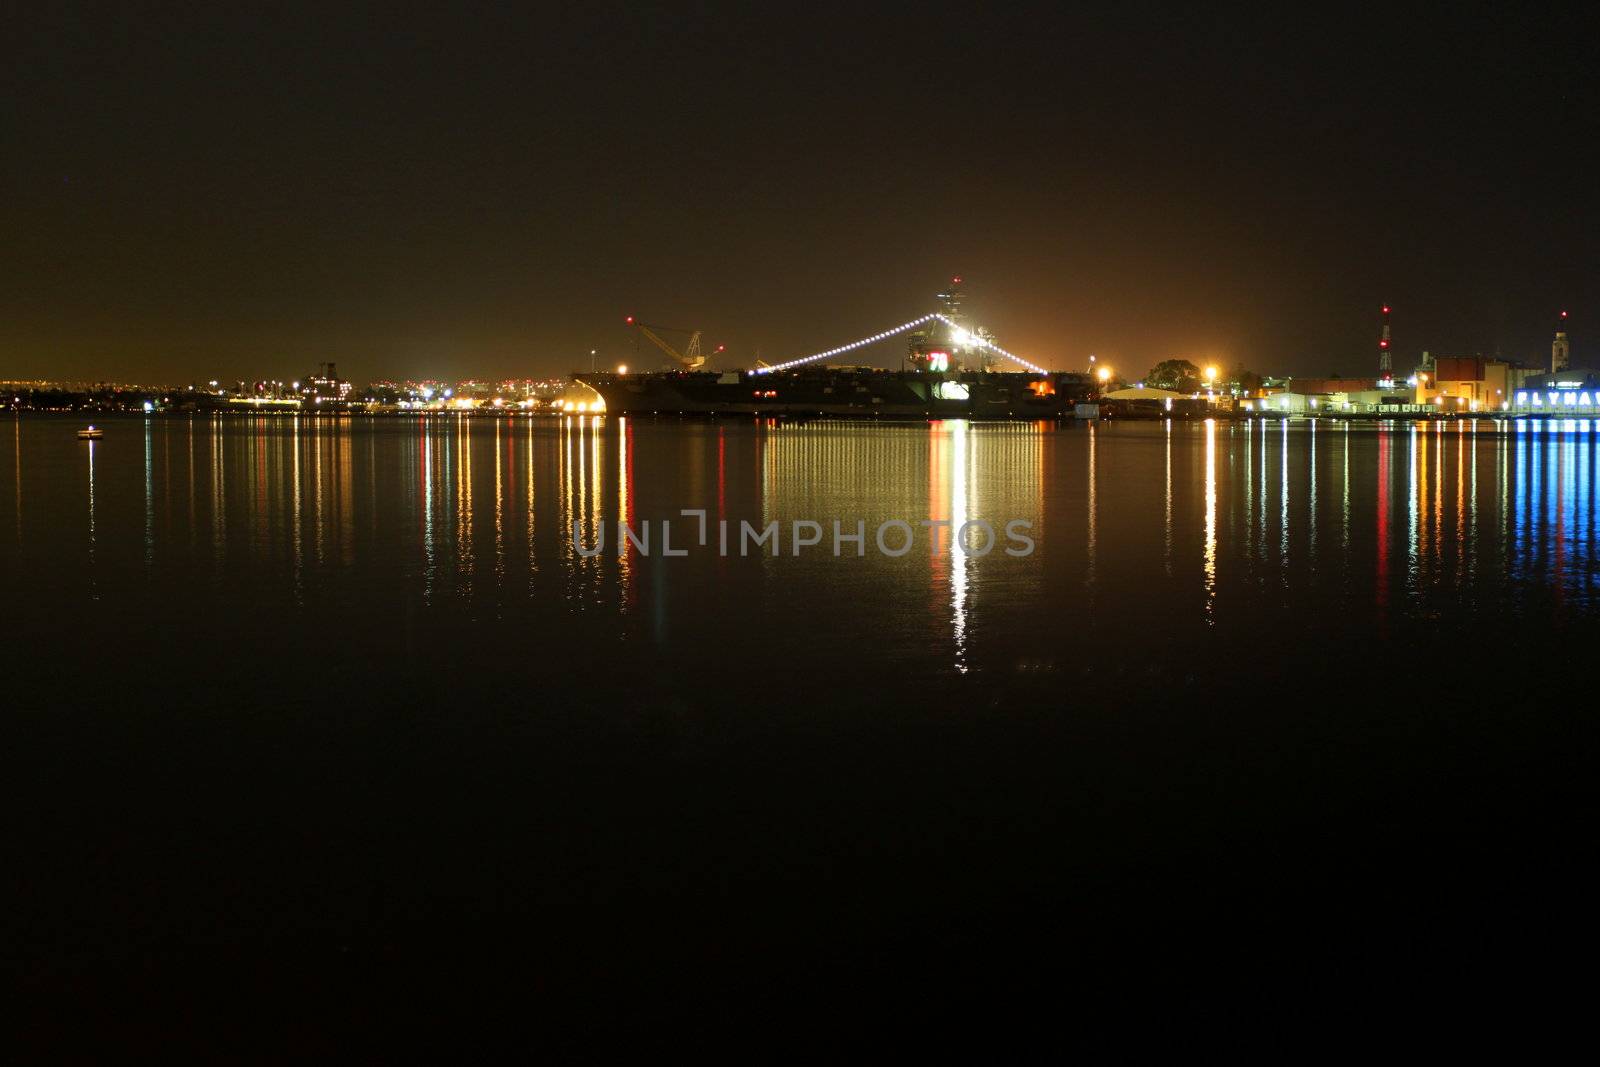 The skyline of San Diego Navy harbor at night with reflection in the water.